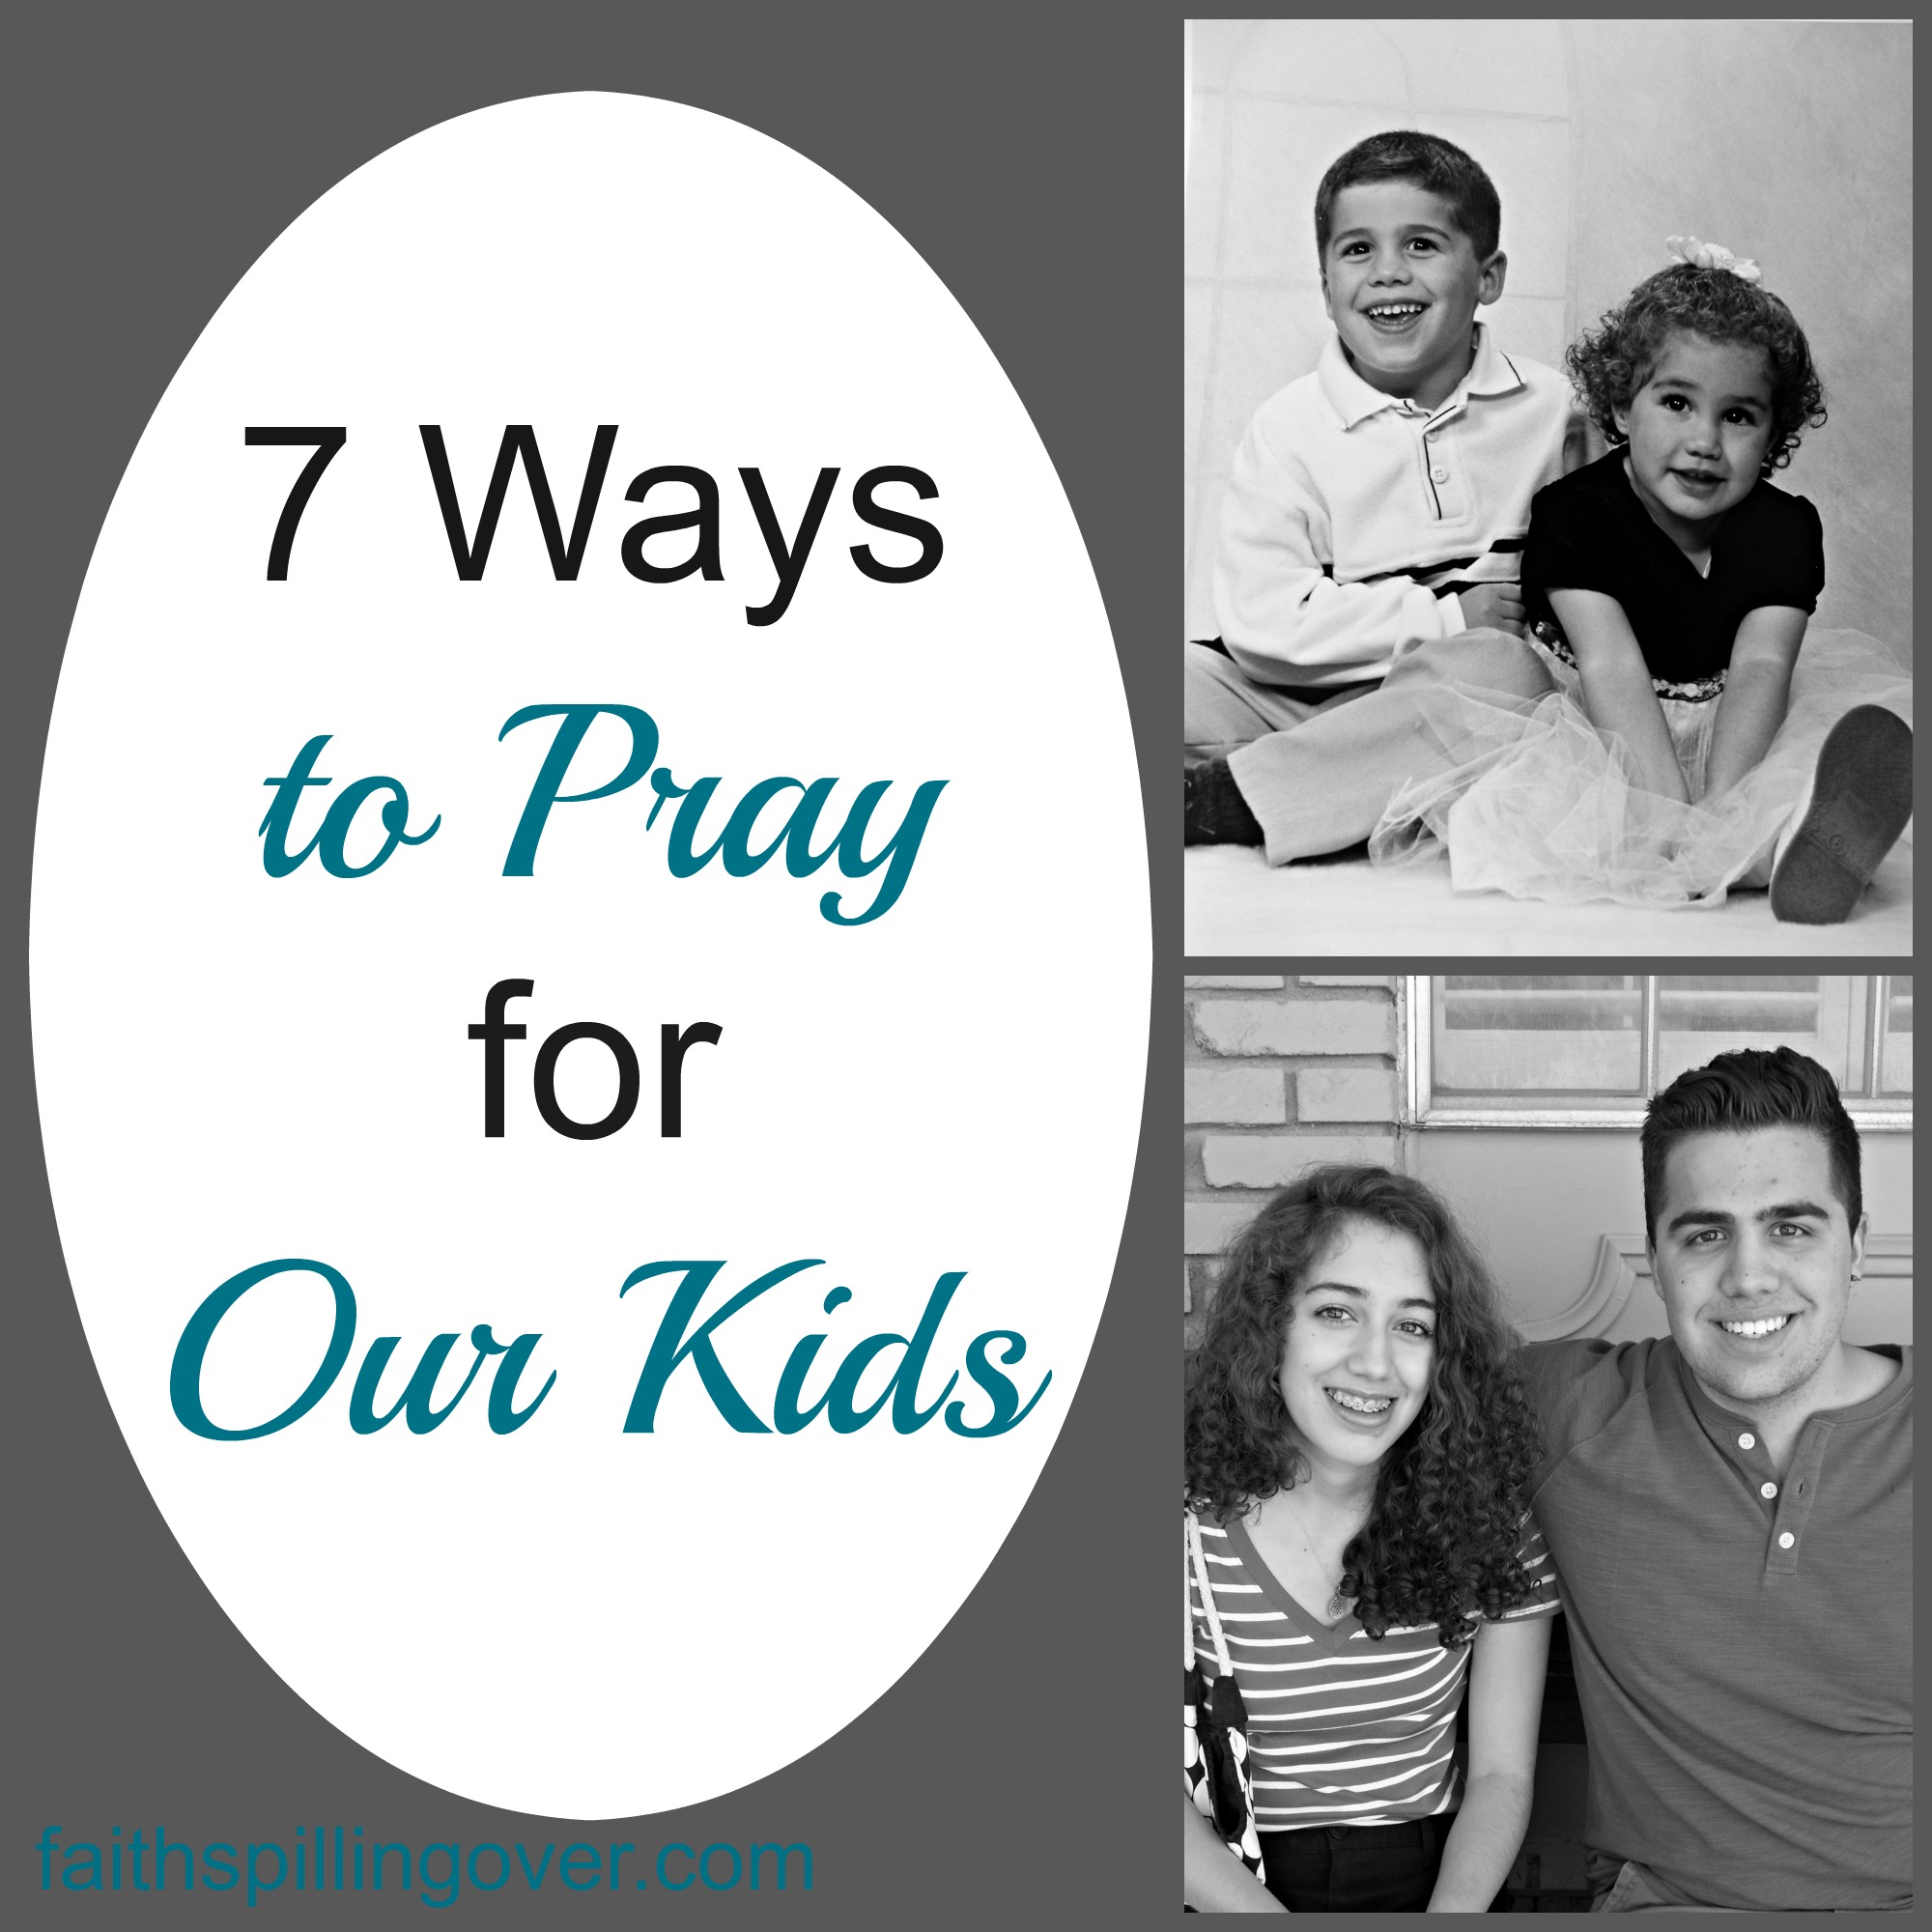 7 prayers for our kids